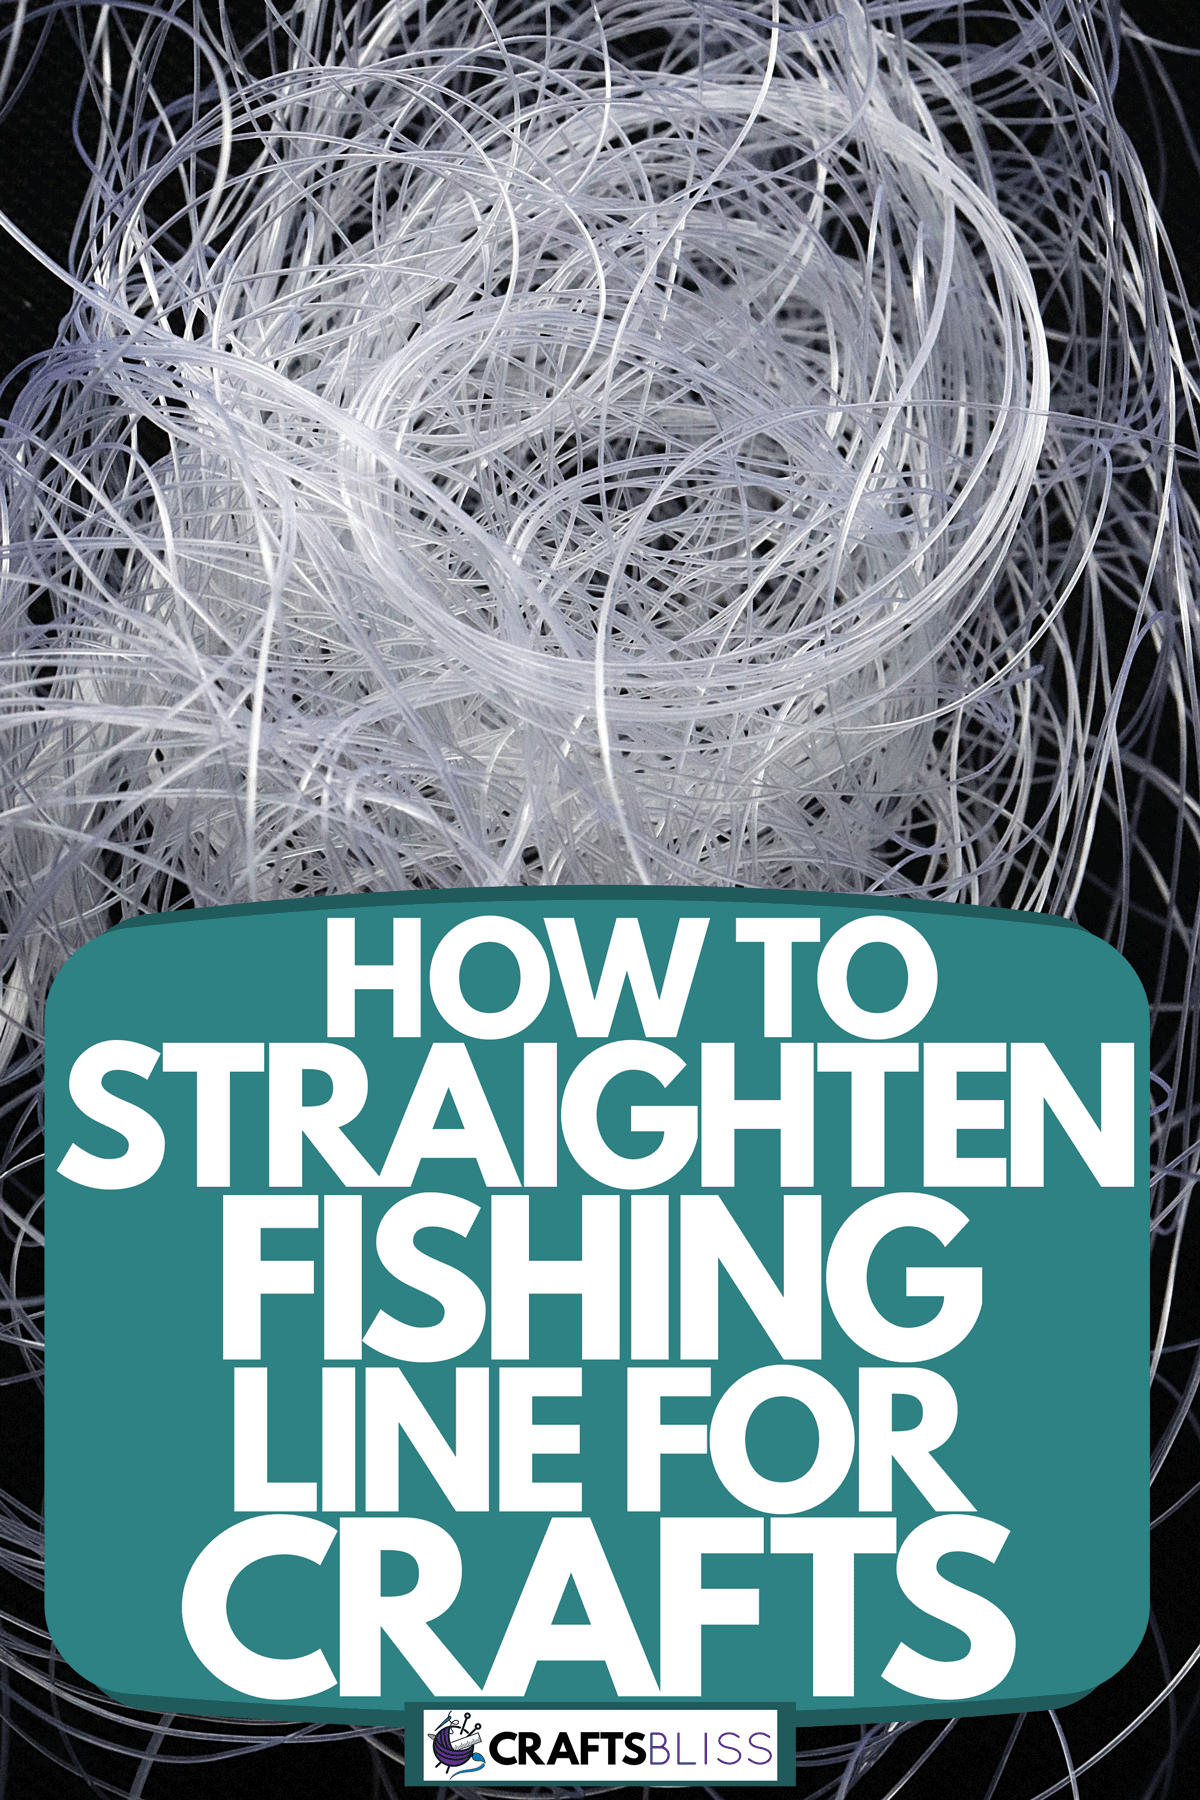 Messy tangled fishing line for crafting, How To Straighten Fishing Line For Crafts